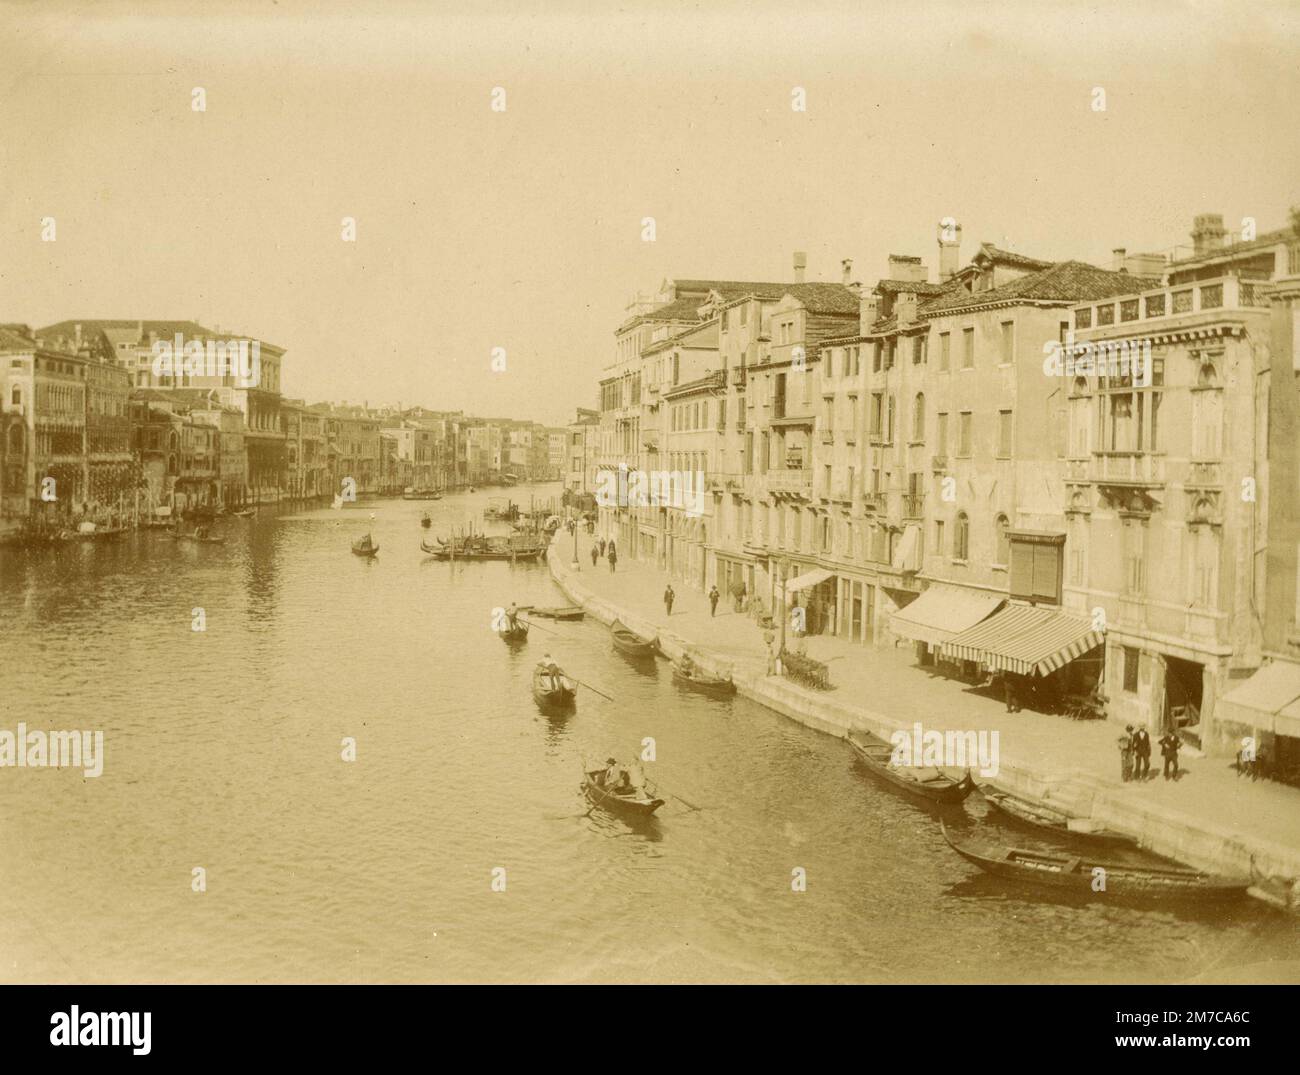 View of the Canal, Venice, Italy 1860s Stock Photo